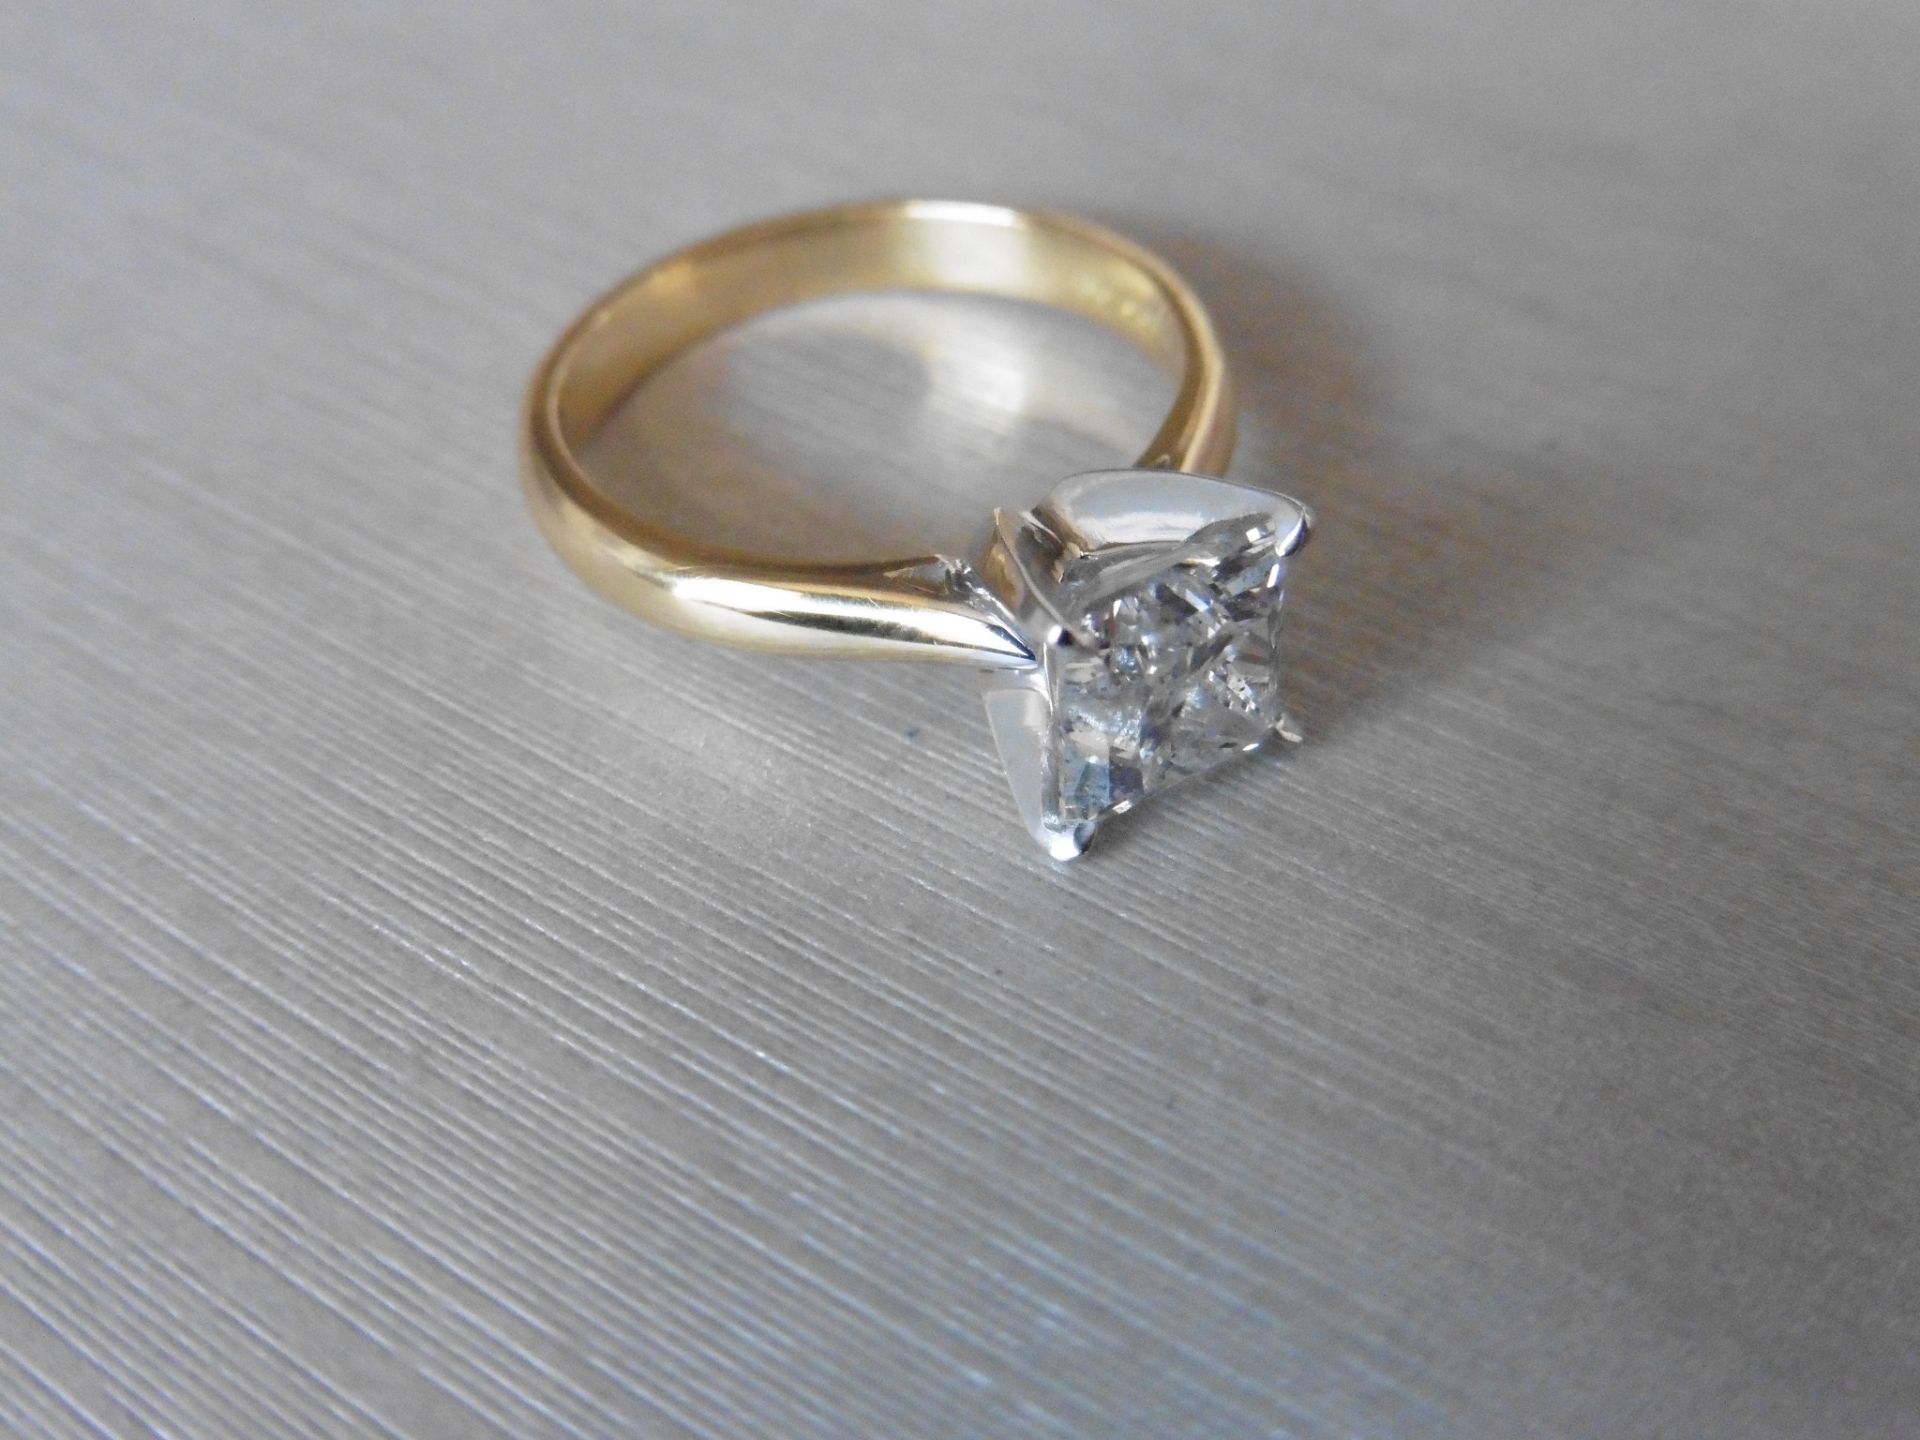 1.23ct diamond solitaire ring with a princess cut diamond. H colour and si3 clarity. Set in 18ct - Image 2 of 3